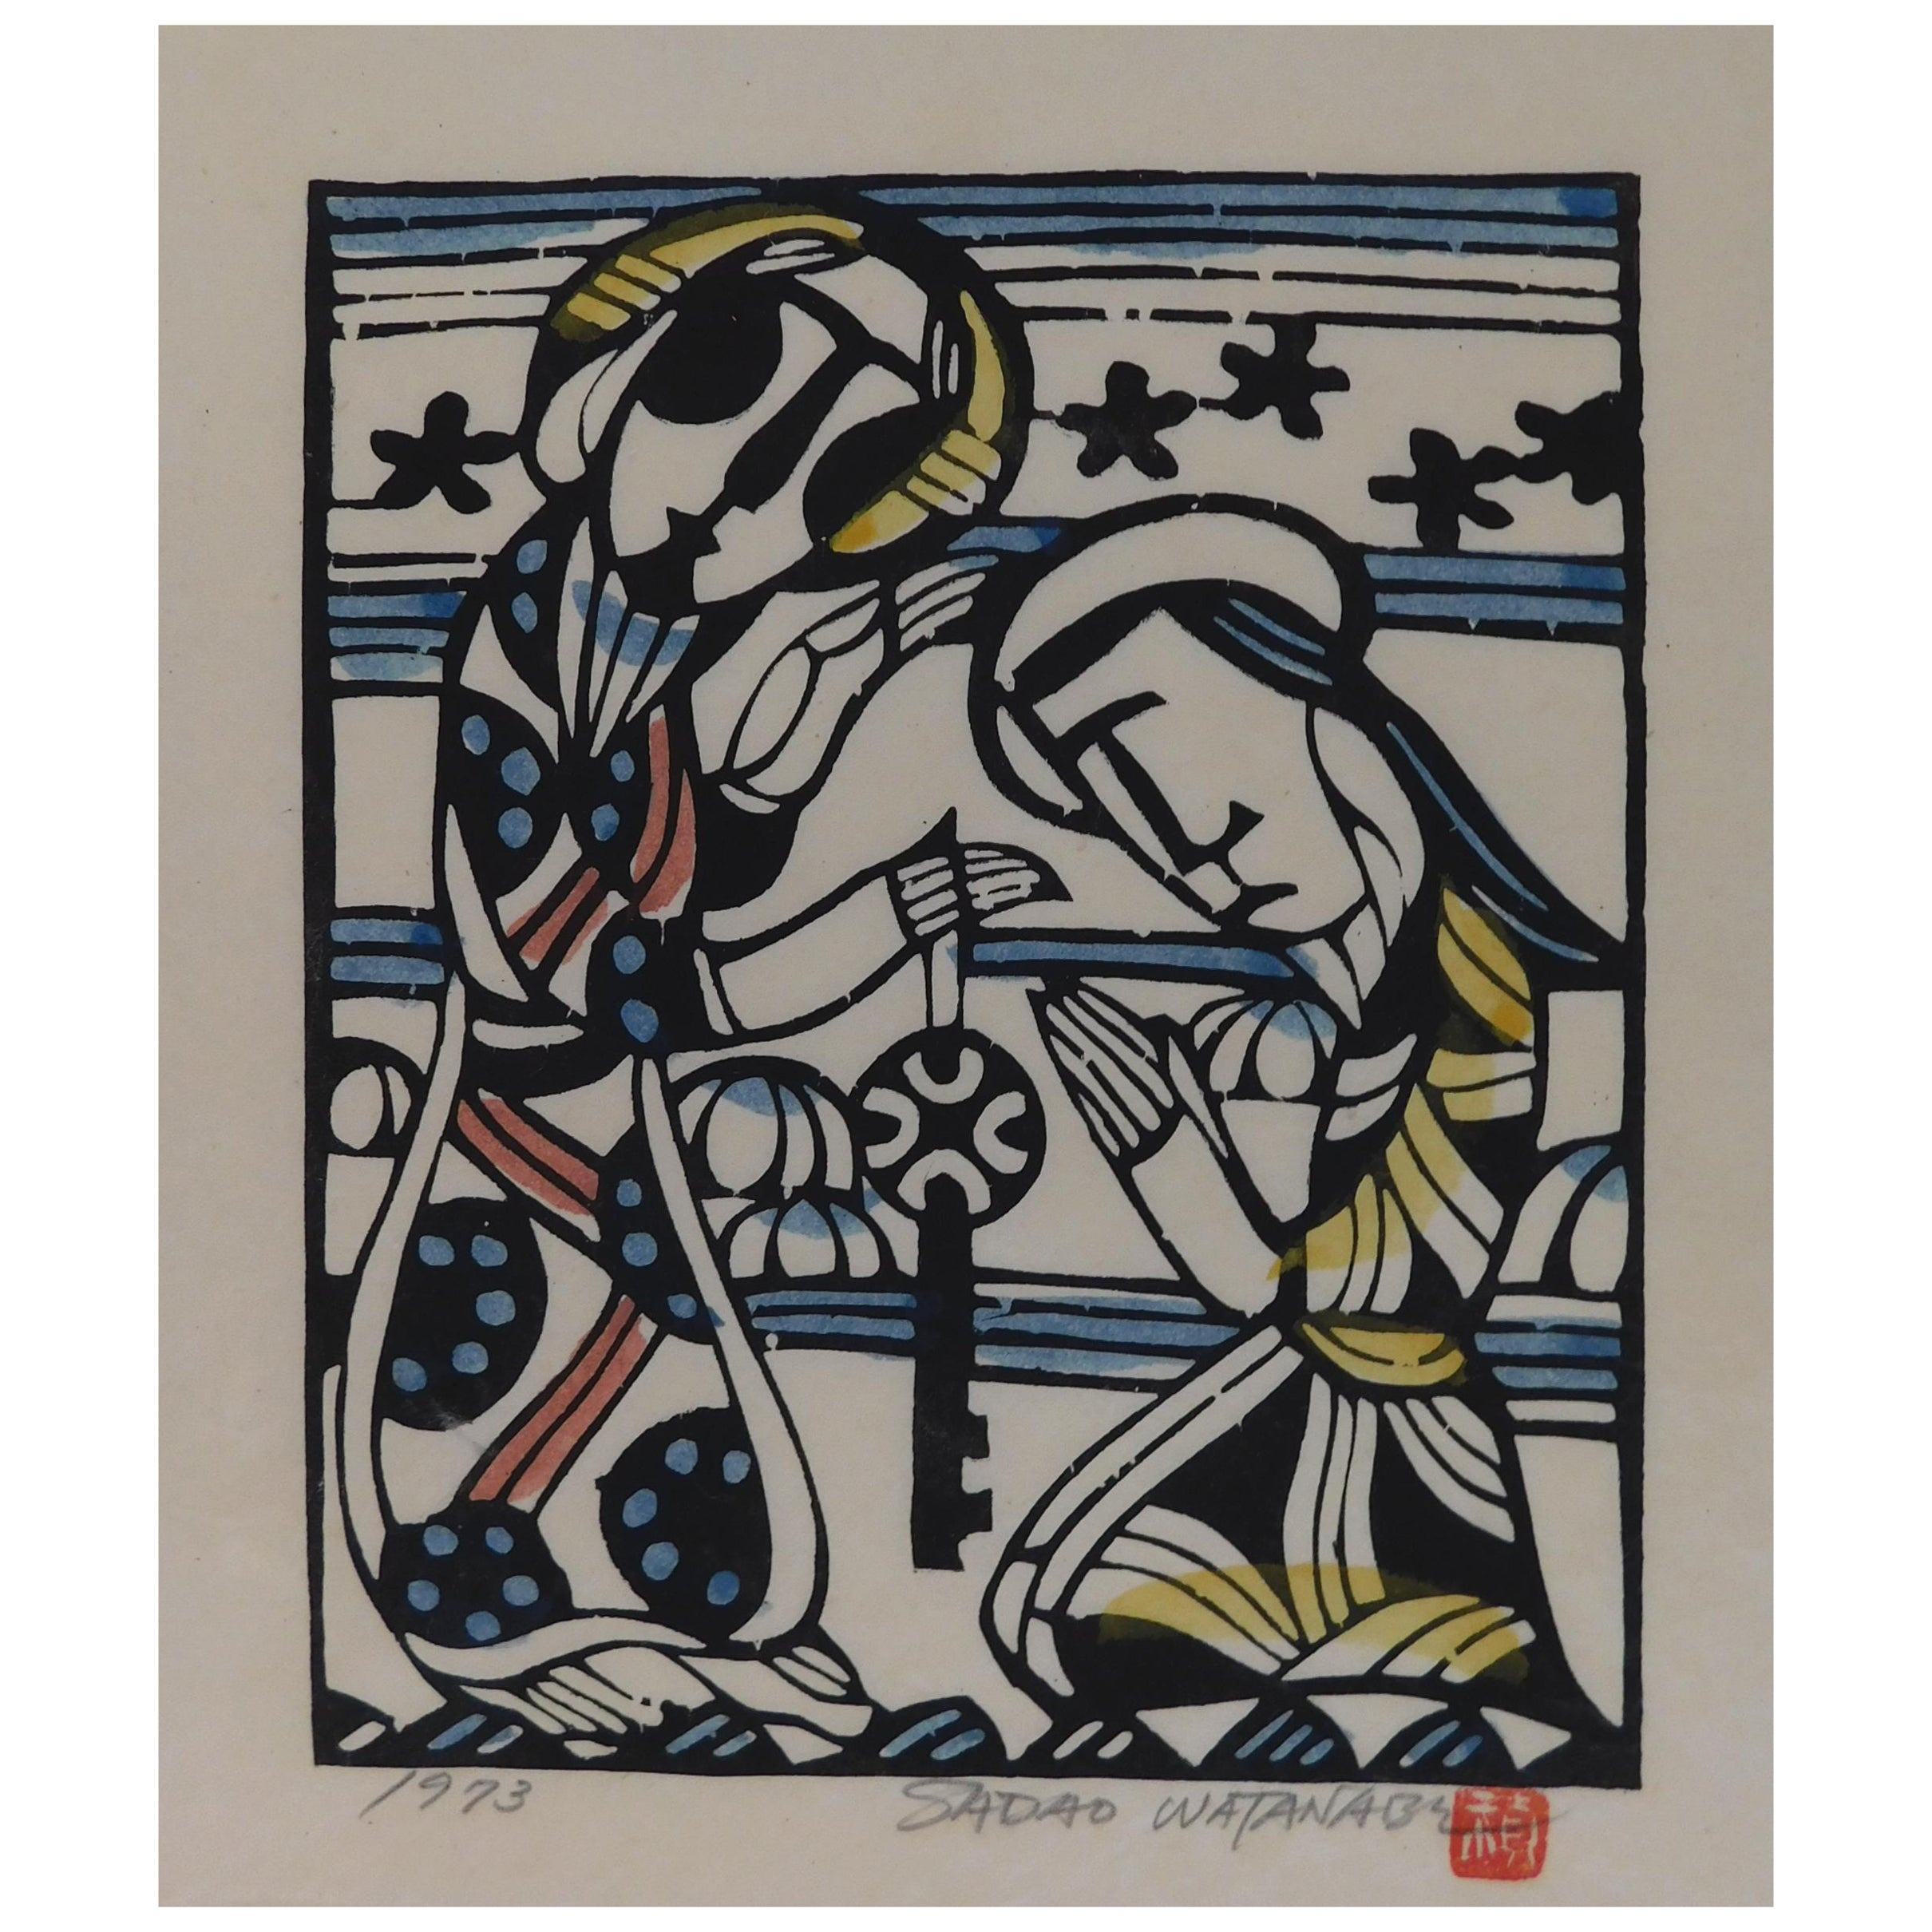 Sadao Watanabe Stencil Print, 1973 - St. Peter and the Key of the Kingdom For Sale